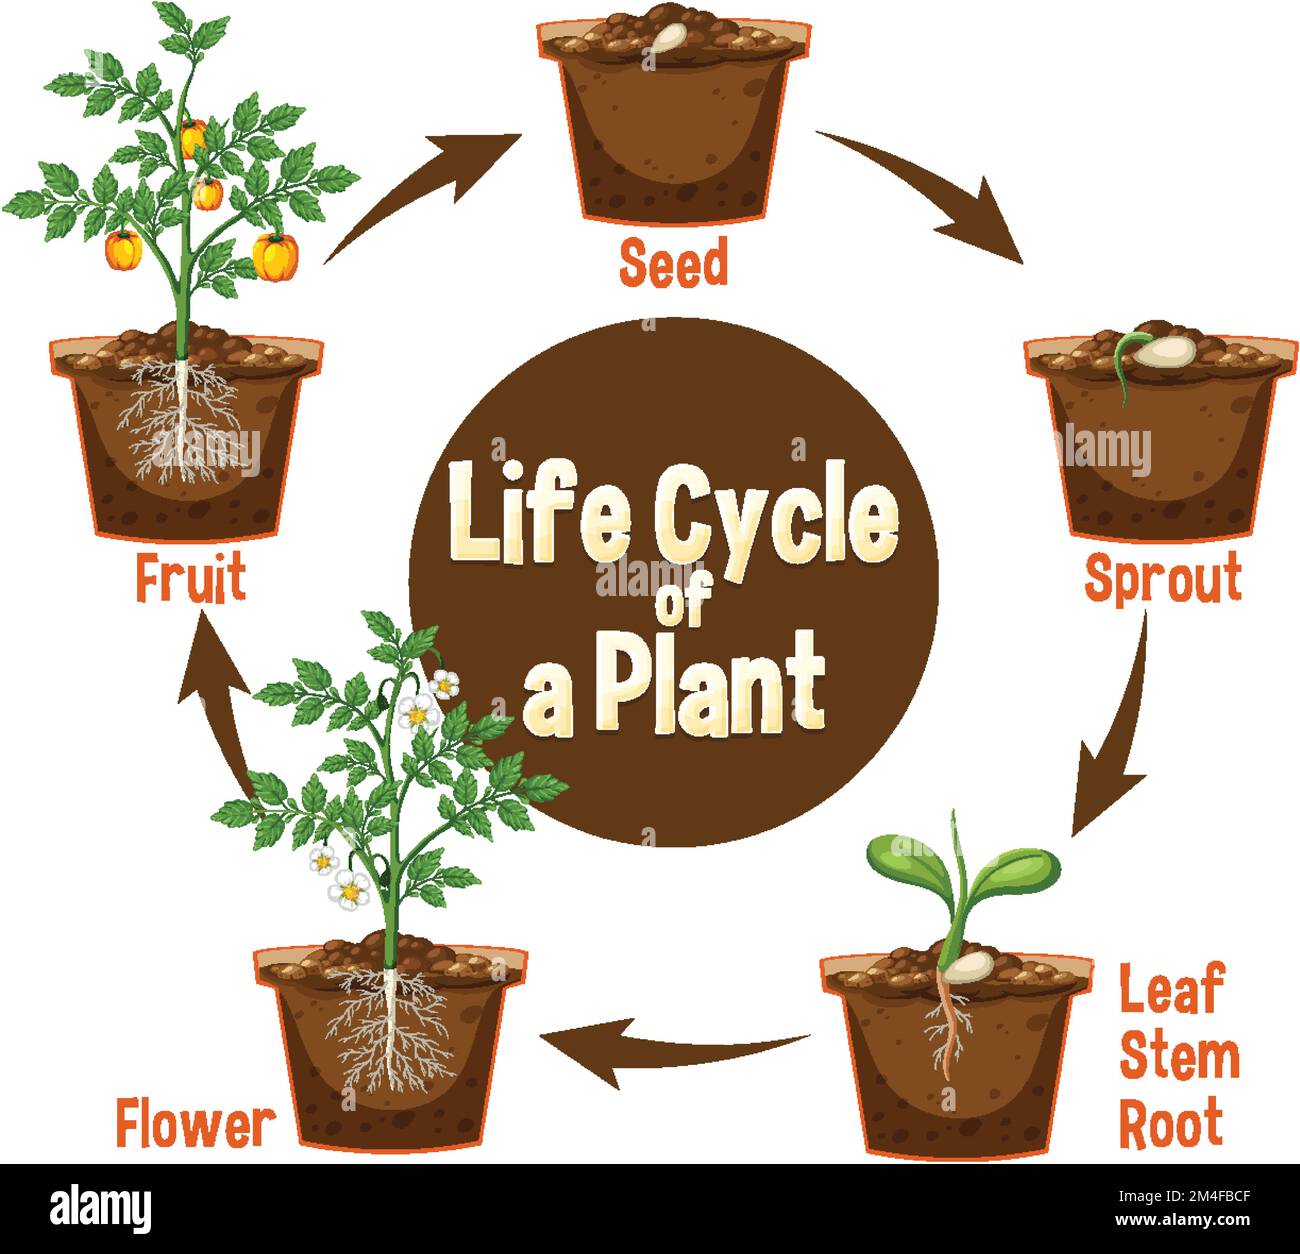 Life cycle of a plant diagram illustration Stock Vector Image & Art - Alamy